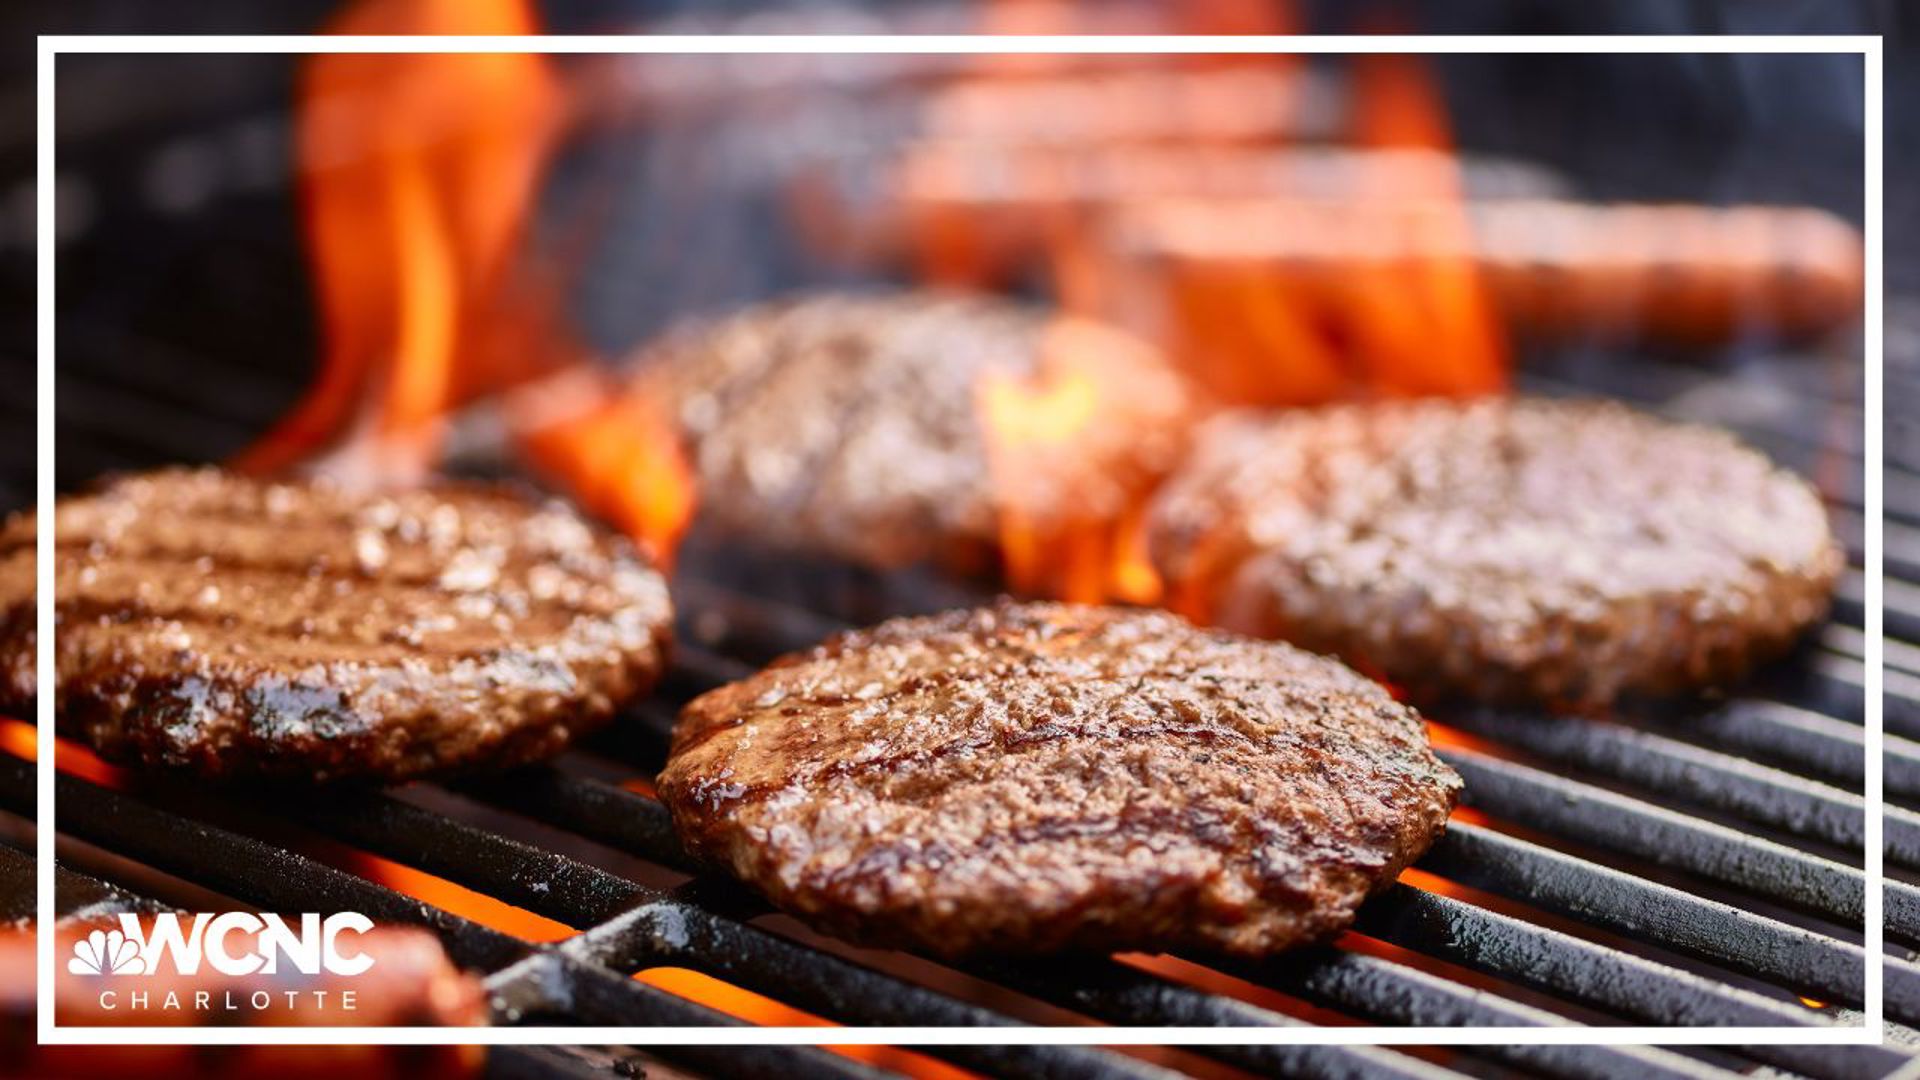 WCNC Charlotte goes over some safety tips for your upcoming grilling this Fourth of July.